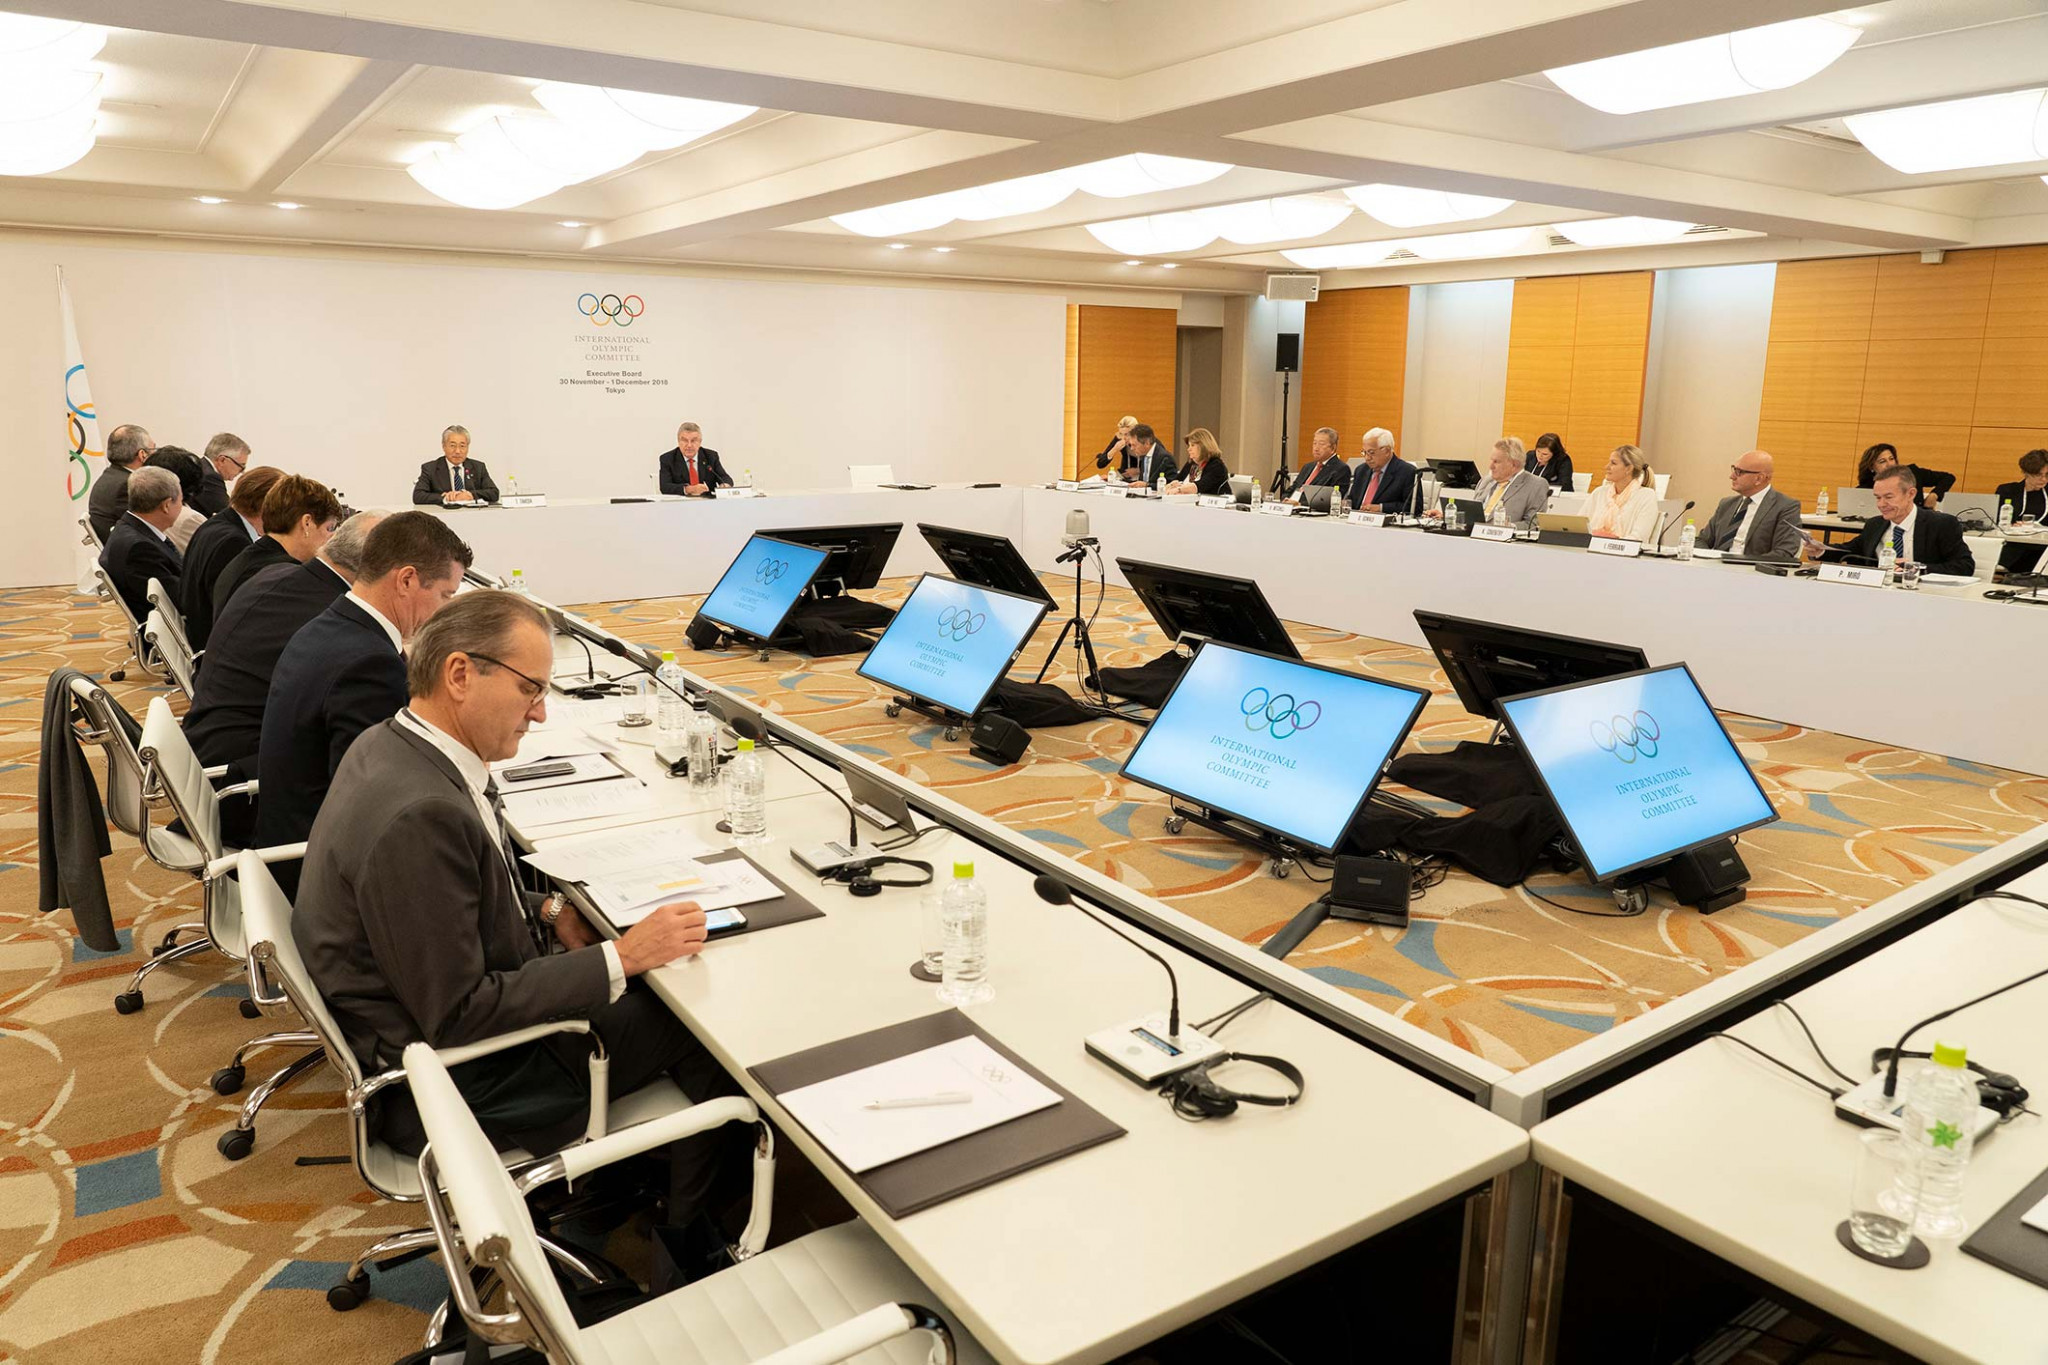 Investigation into AIBA to reach key milestone as IOC Executive Board prepares for interim report from Inquiry Committee